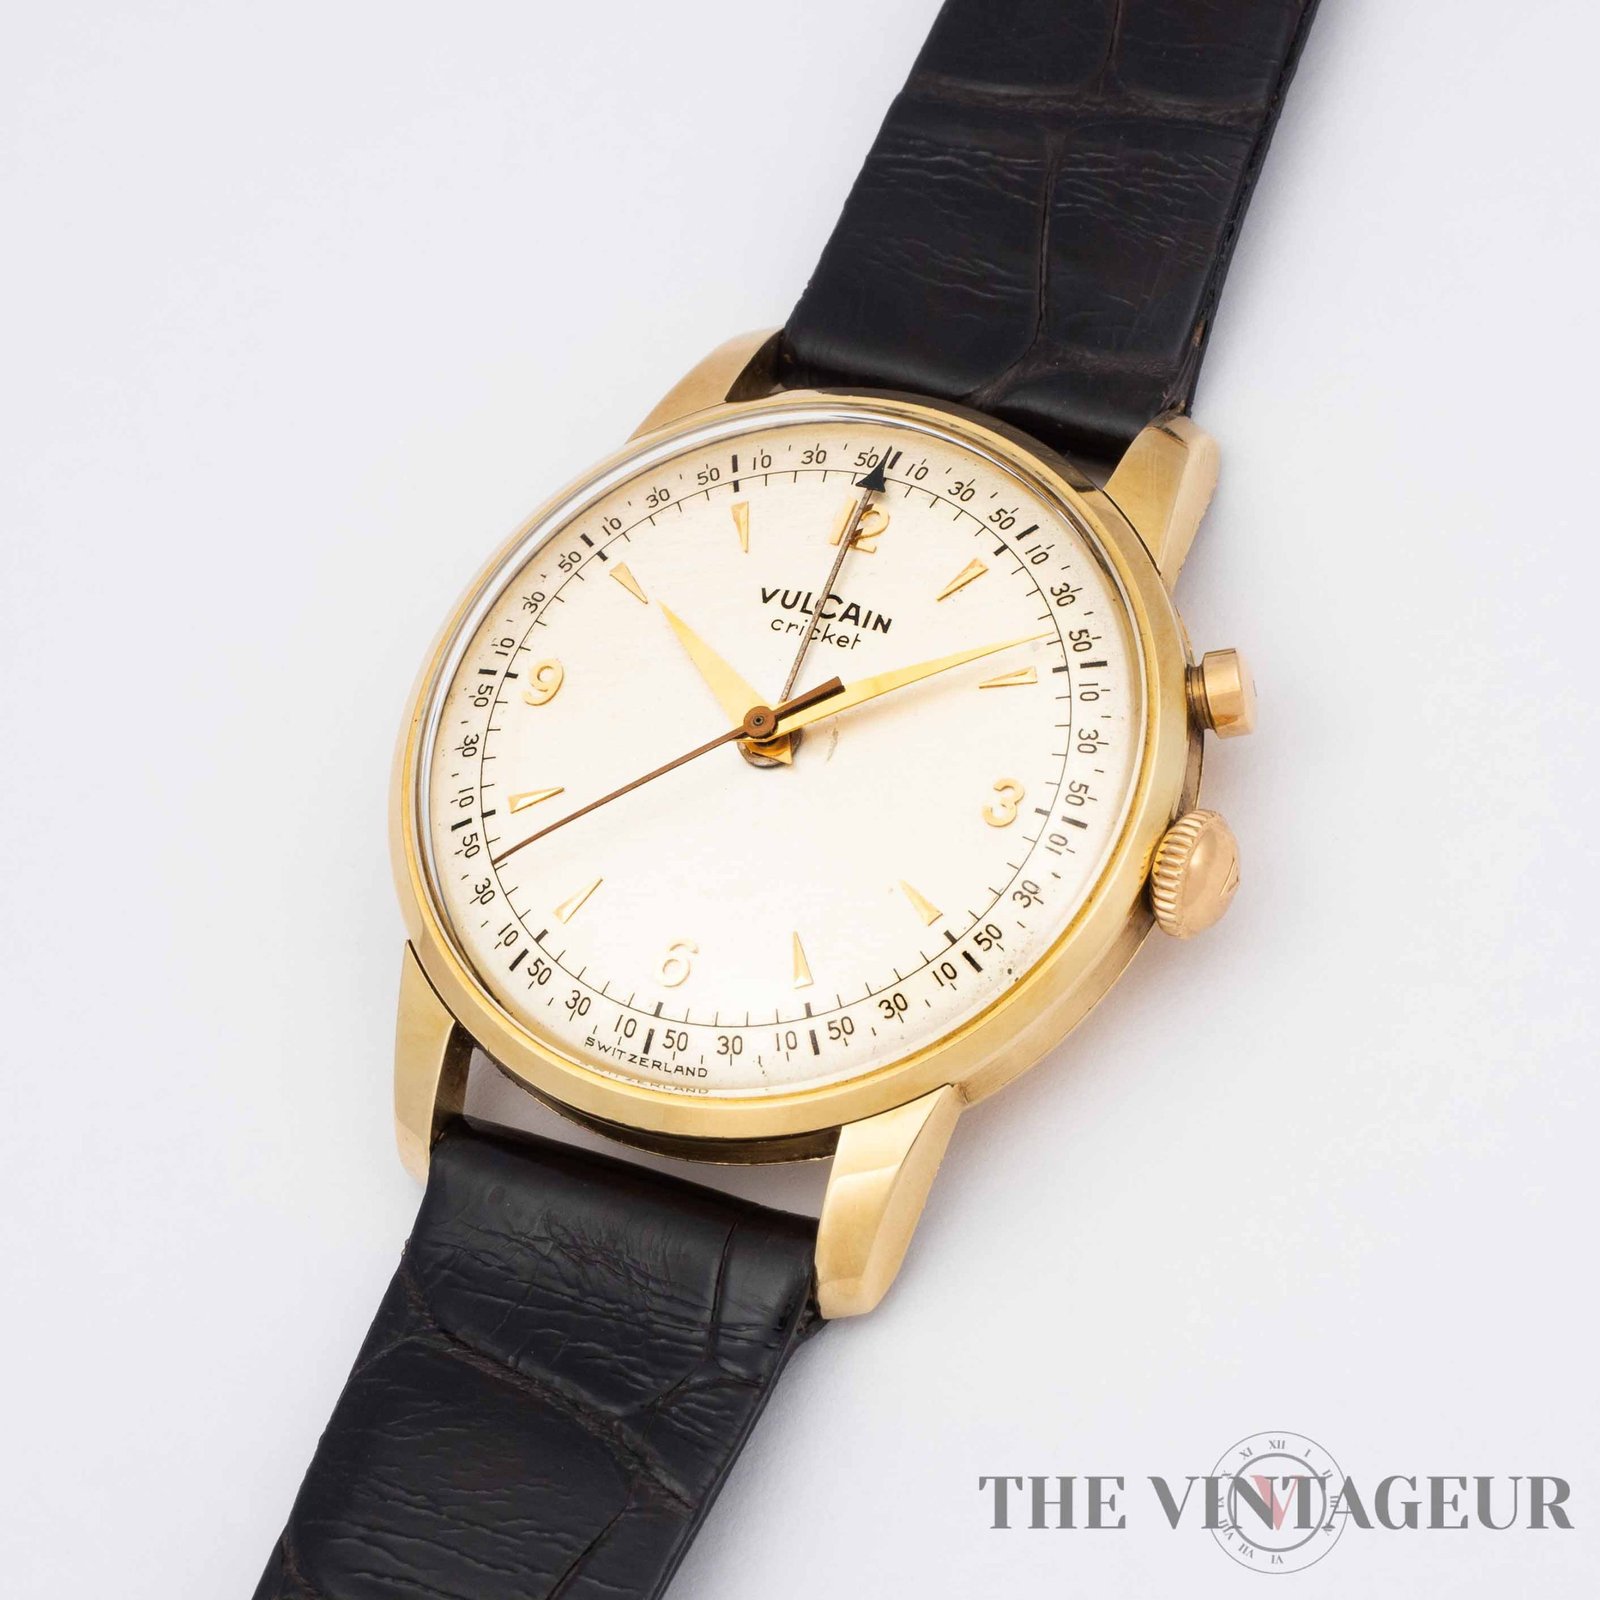 Vulcain - Cricket - The Vintageur - Your bespoke watches collection - Collectible watches and more